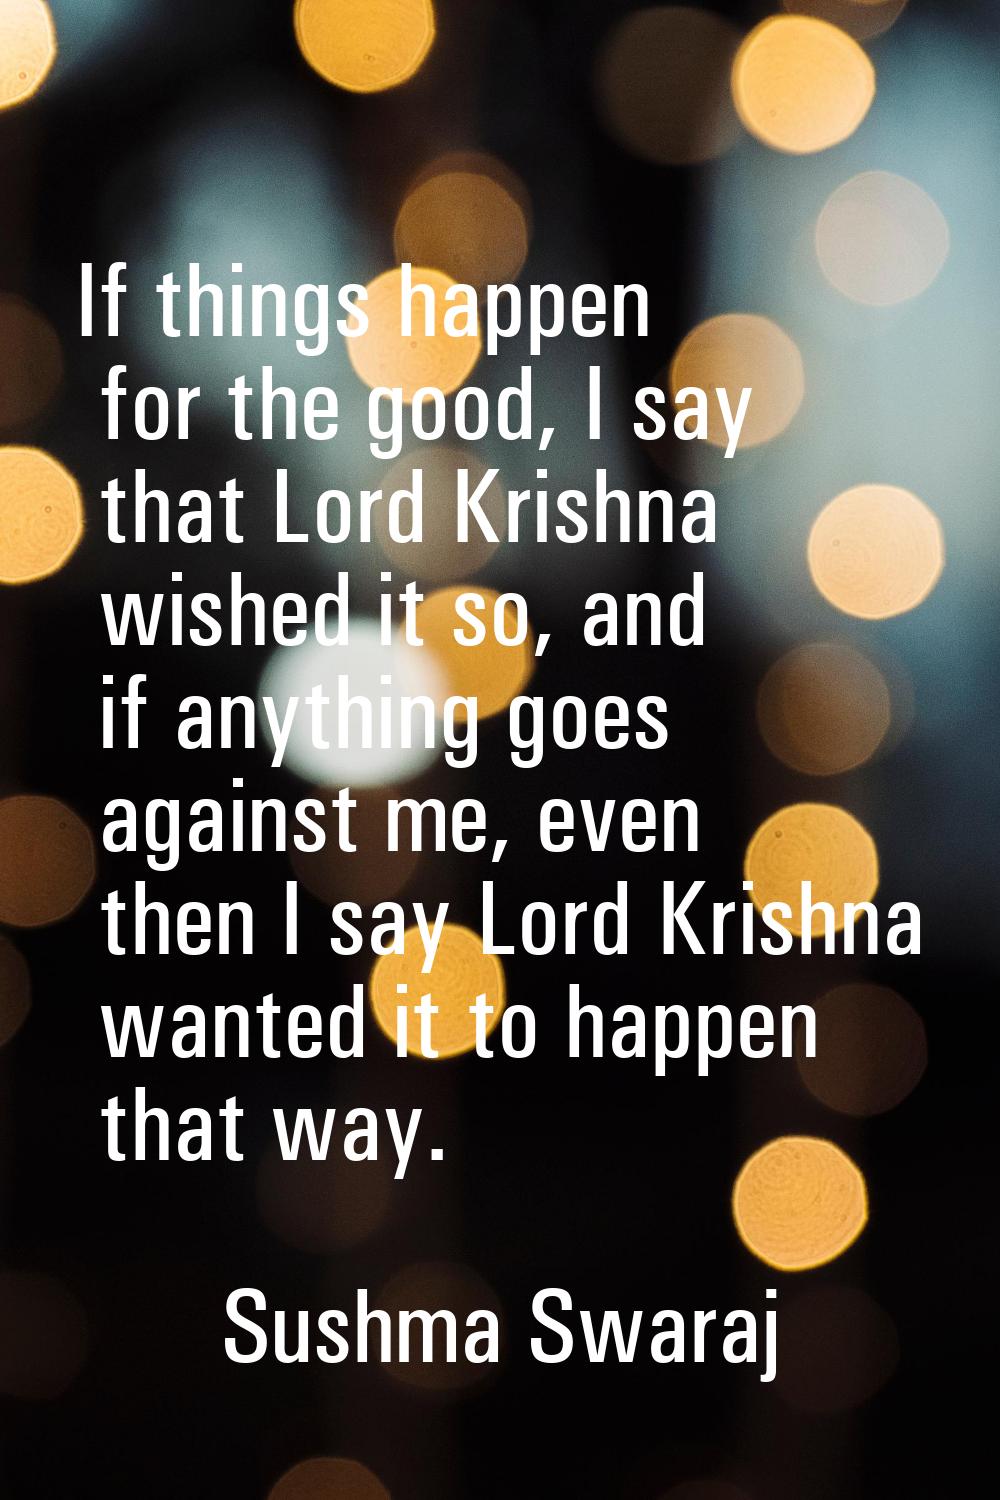 If things happen for the good, I say that Lord Krishna wished it so, and if anything goes against m